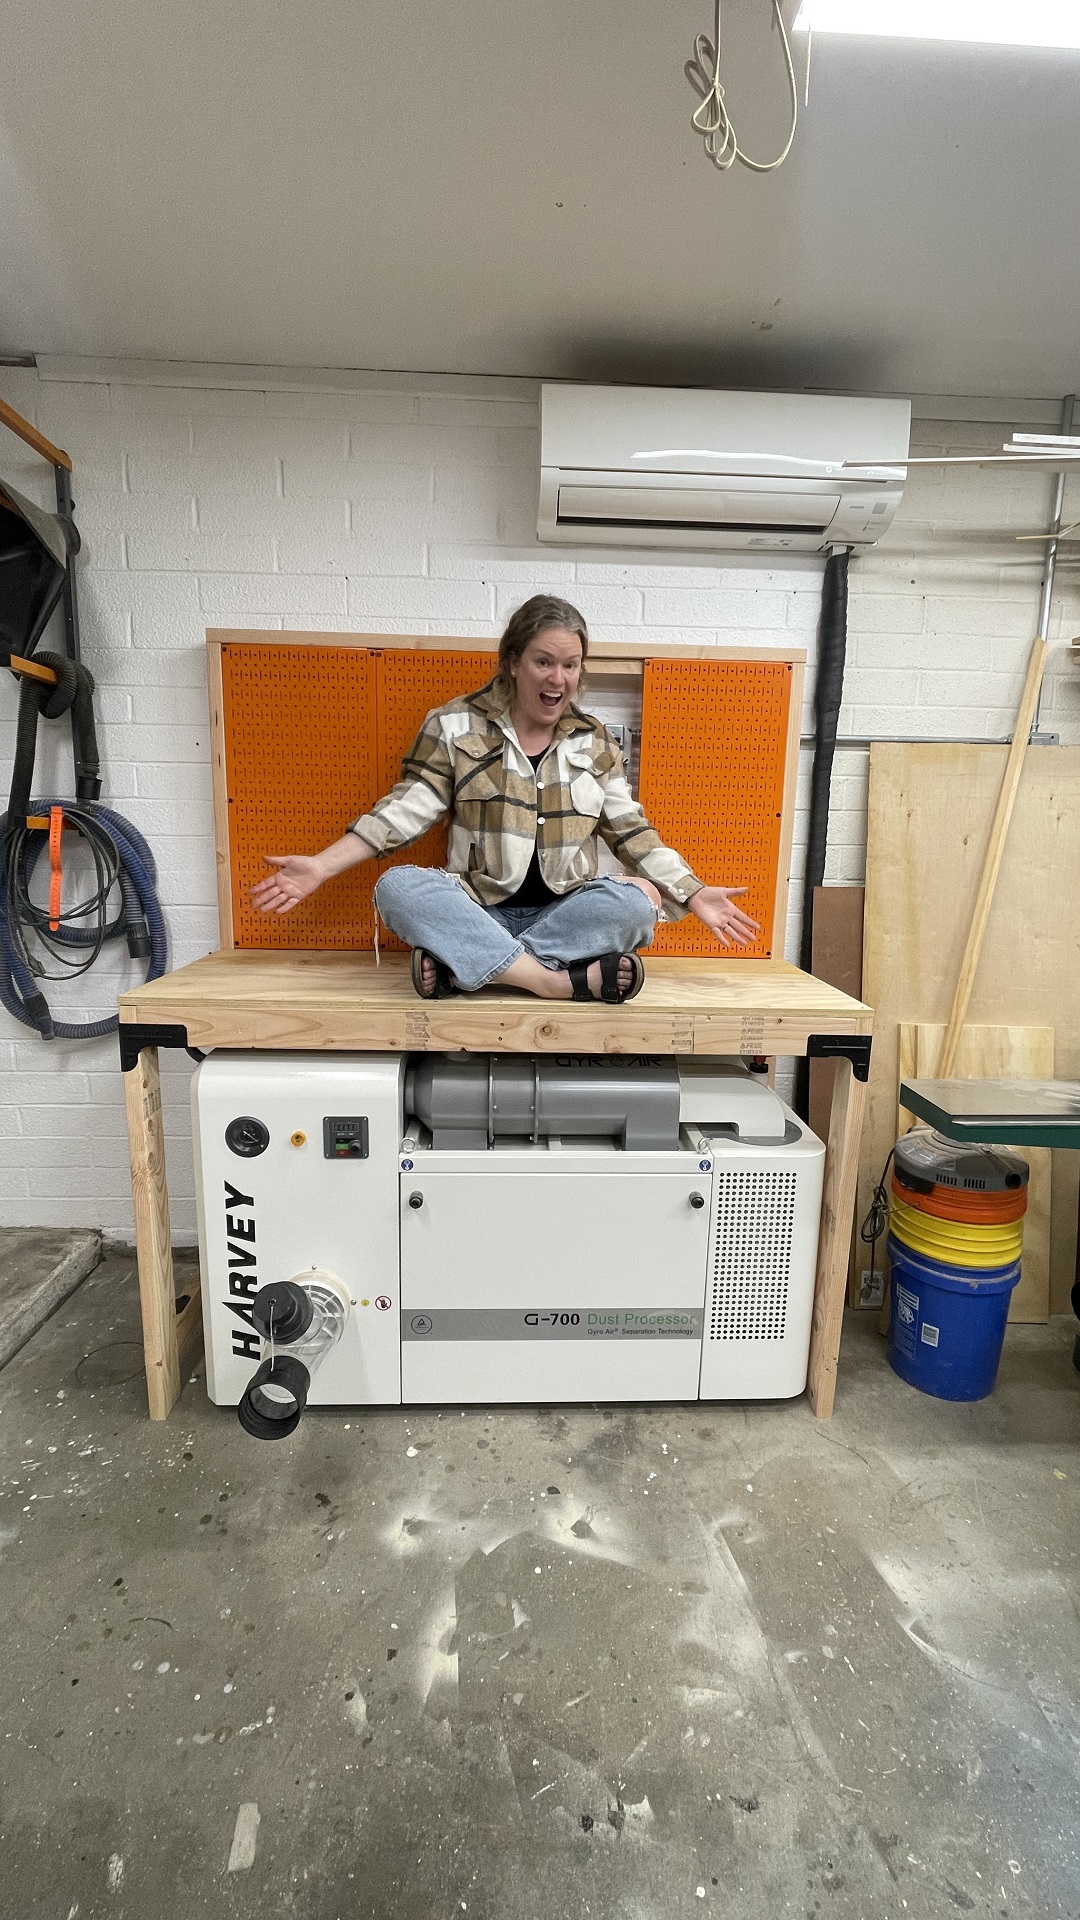 Sadie with the completed workbench